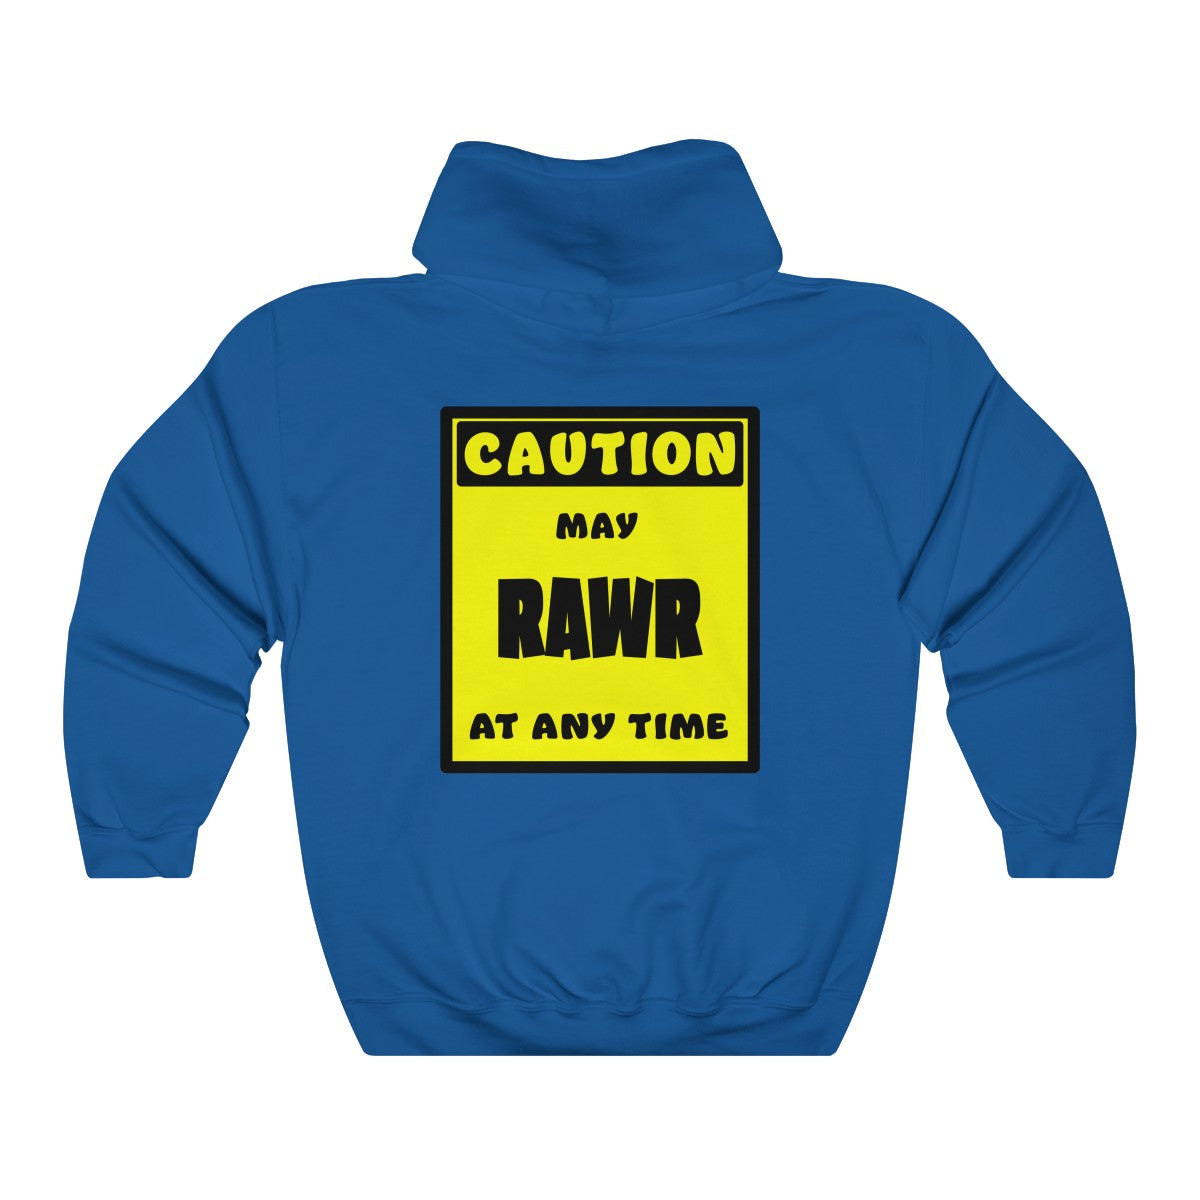 CAUTION! May RAWR at any time! - Hoodie Hoodie AFLT-Whootorca Royal Blue S 